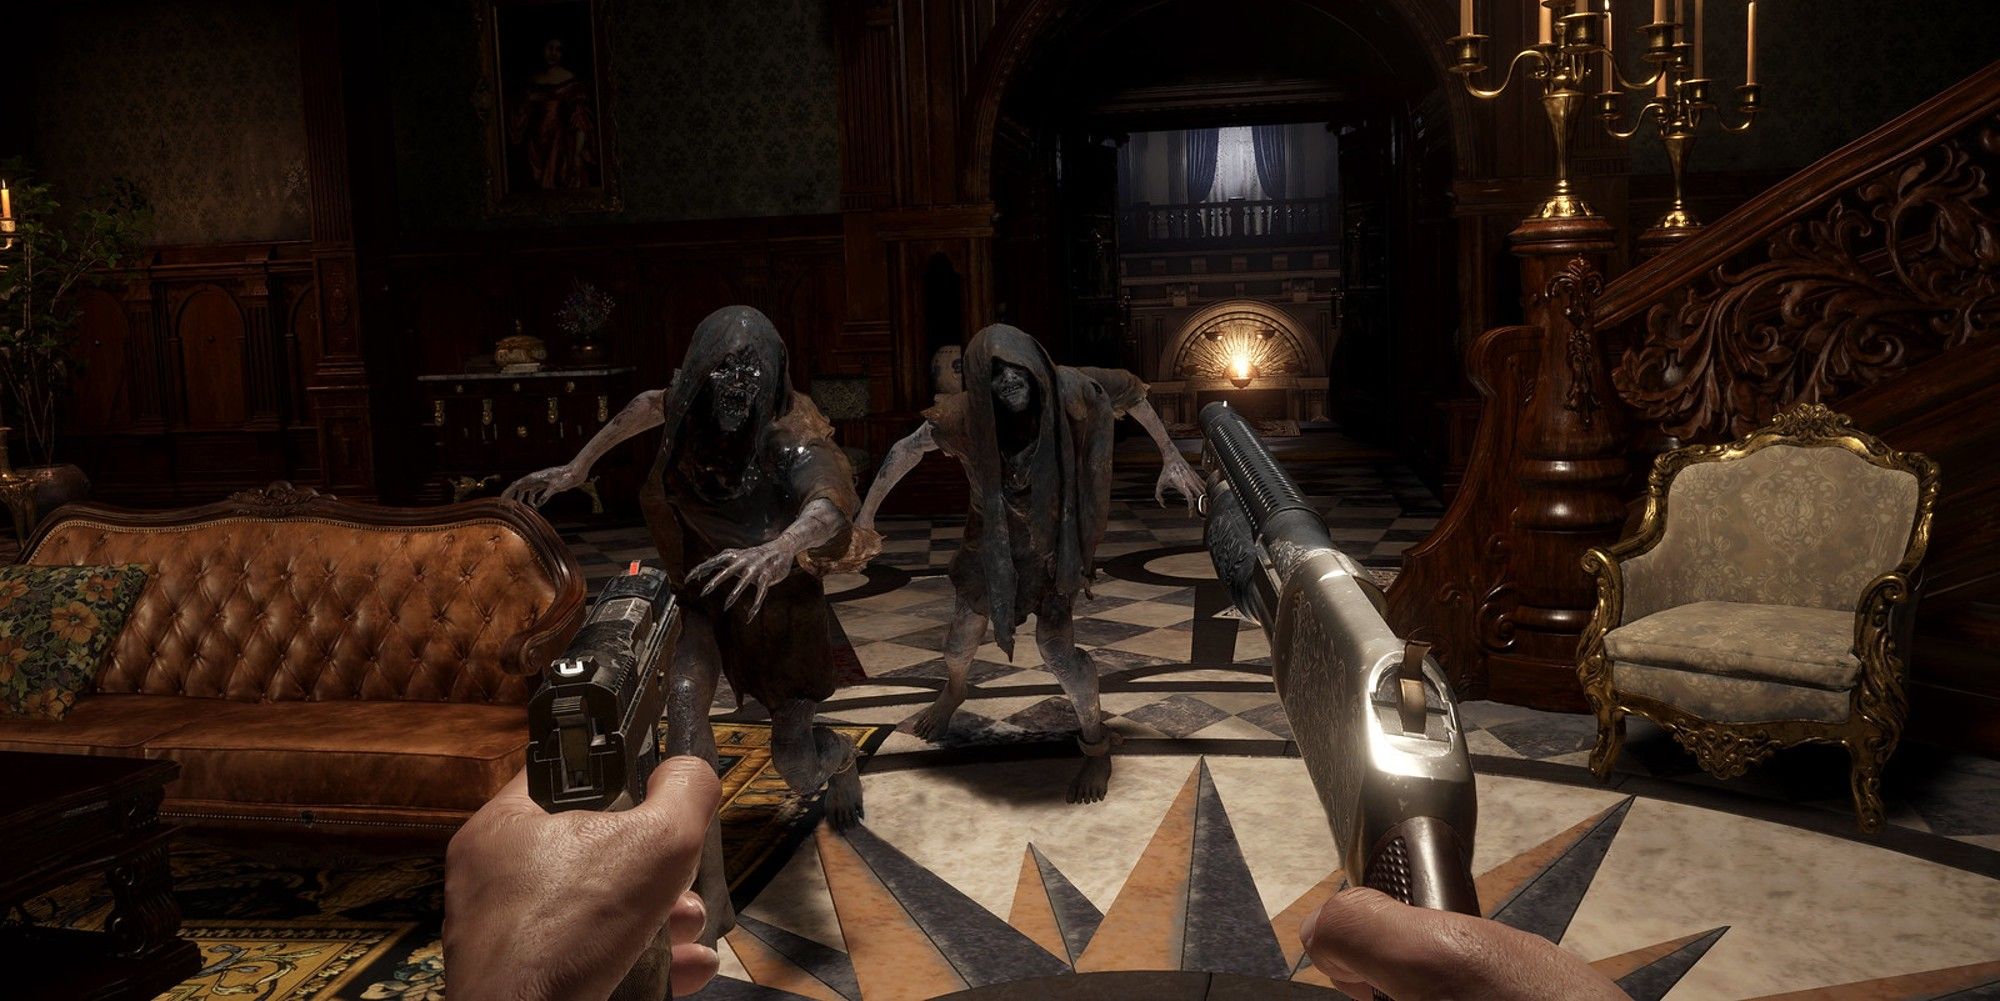 Resident Evil Village VR Gameplay Trailer Makes It Look Like A Hectic FPS